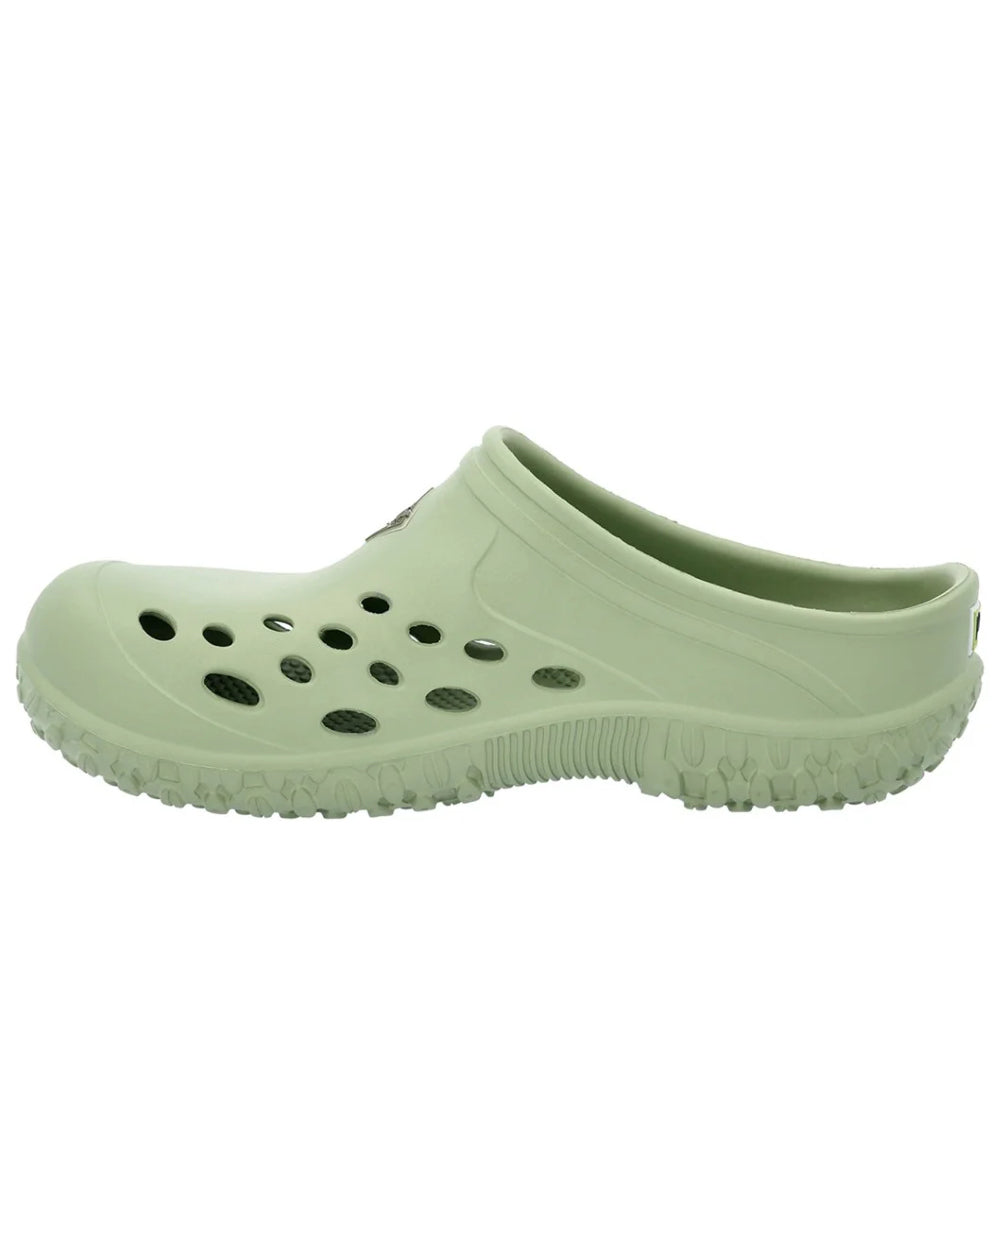 Resida Green Coloured Muck Boots Womens Muckster Lite Clogs On A White Background 